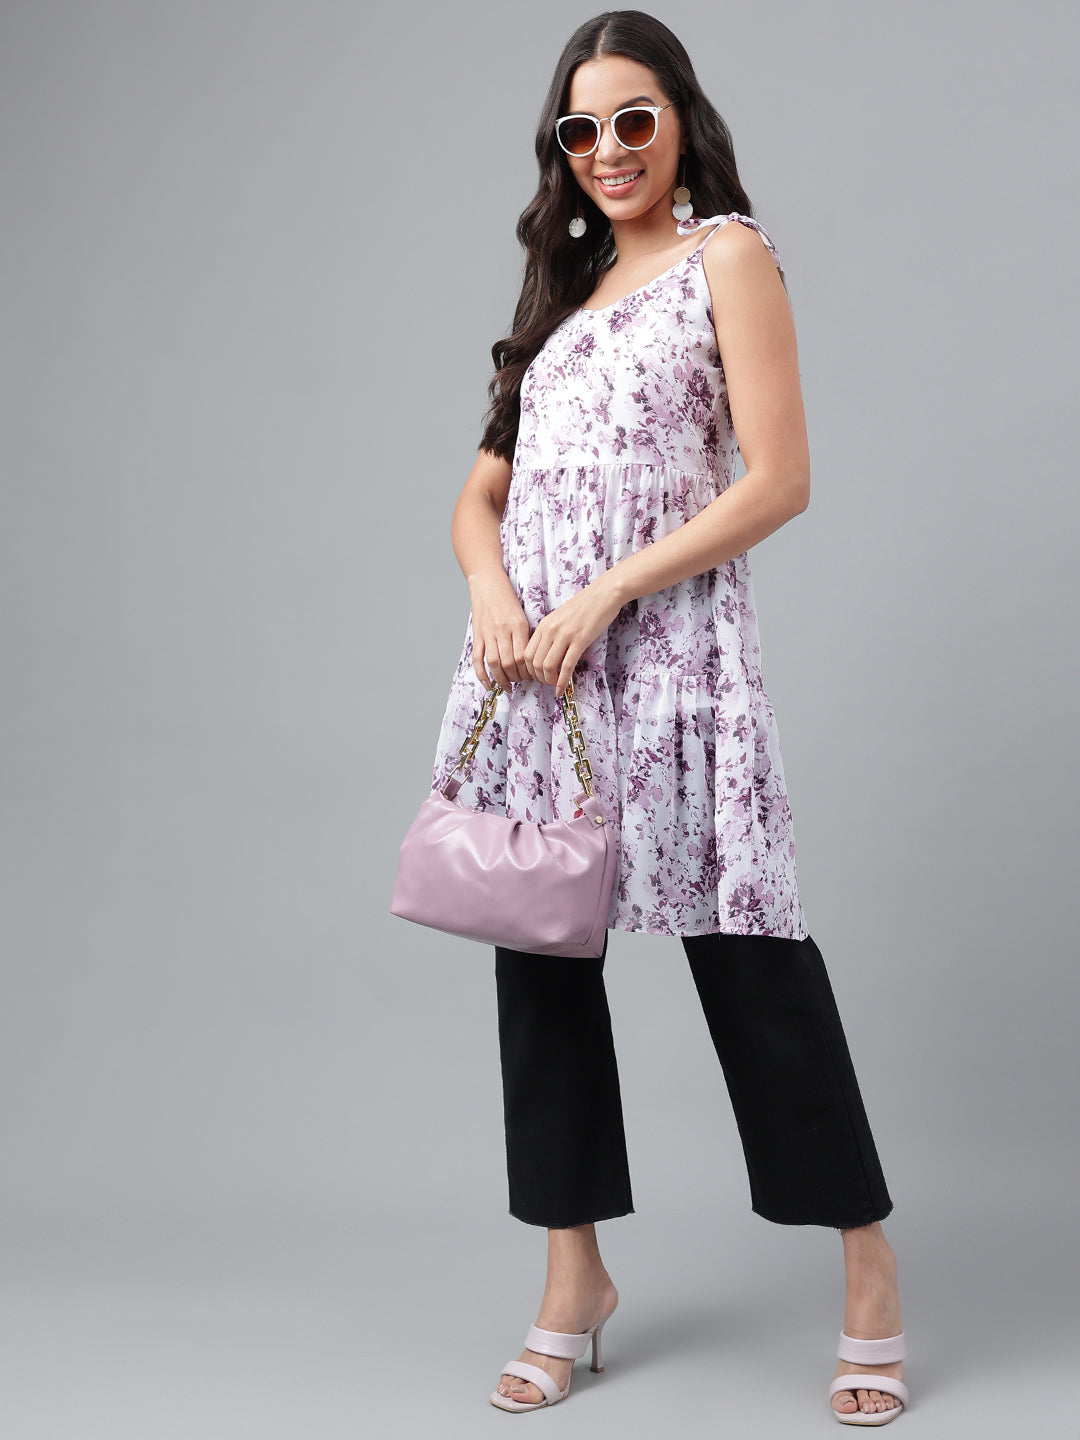 White and Purple Georgette floral top sleeveless